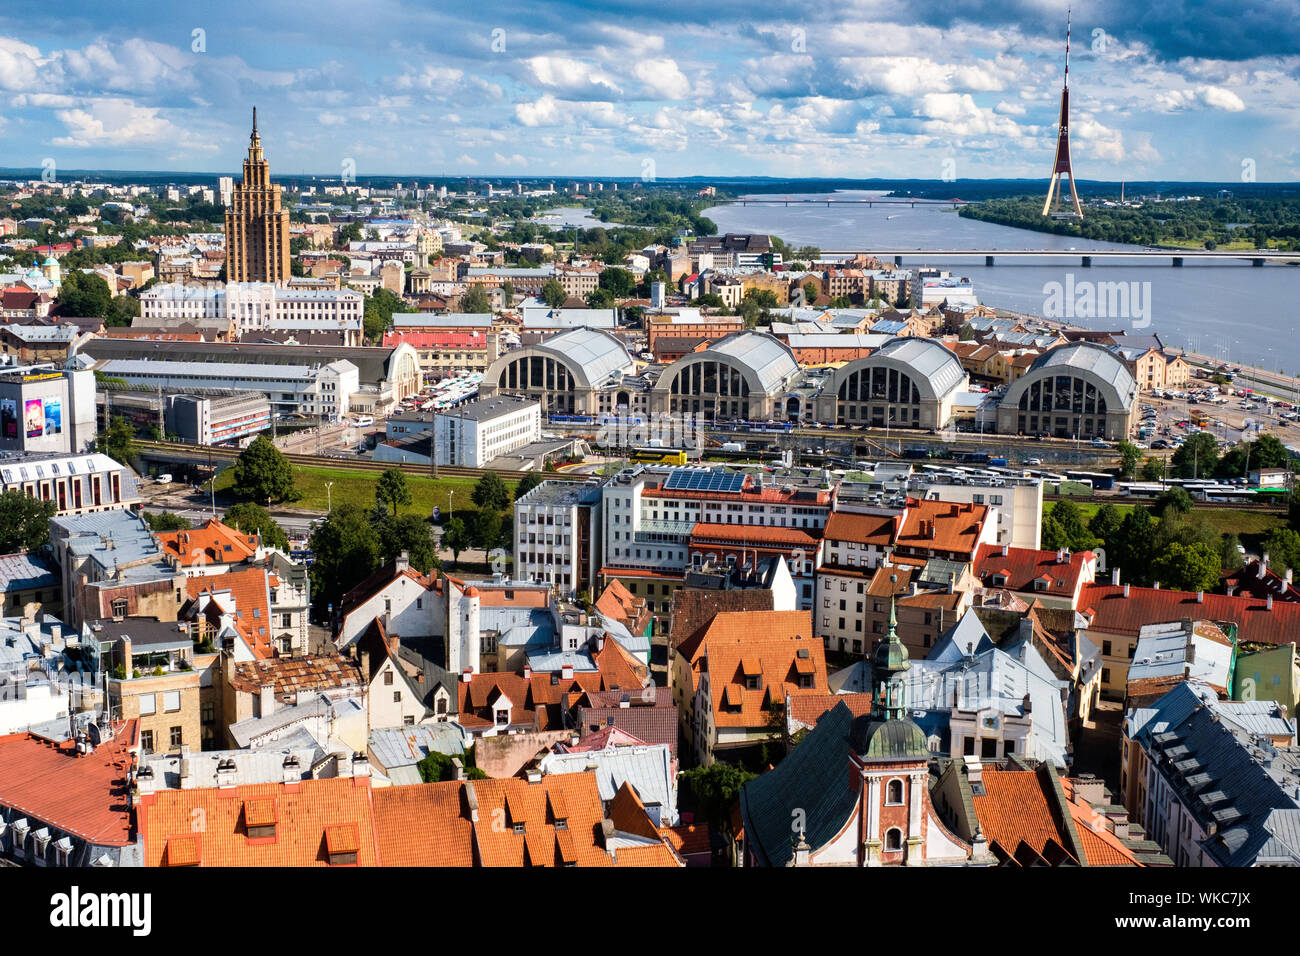 Latvia: Riga. General view of the city. On the foreground, the Central Market, an UNESCO World Heritage Site. Four big old Zeppelin airships warehouse Stock Photo